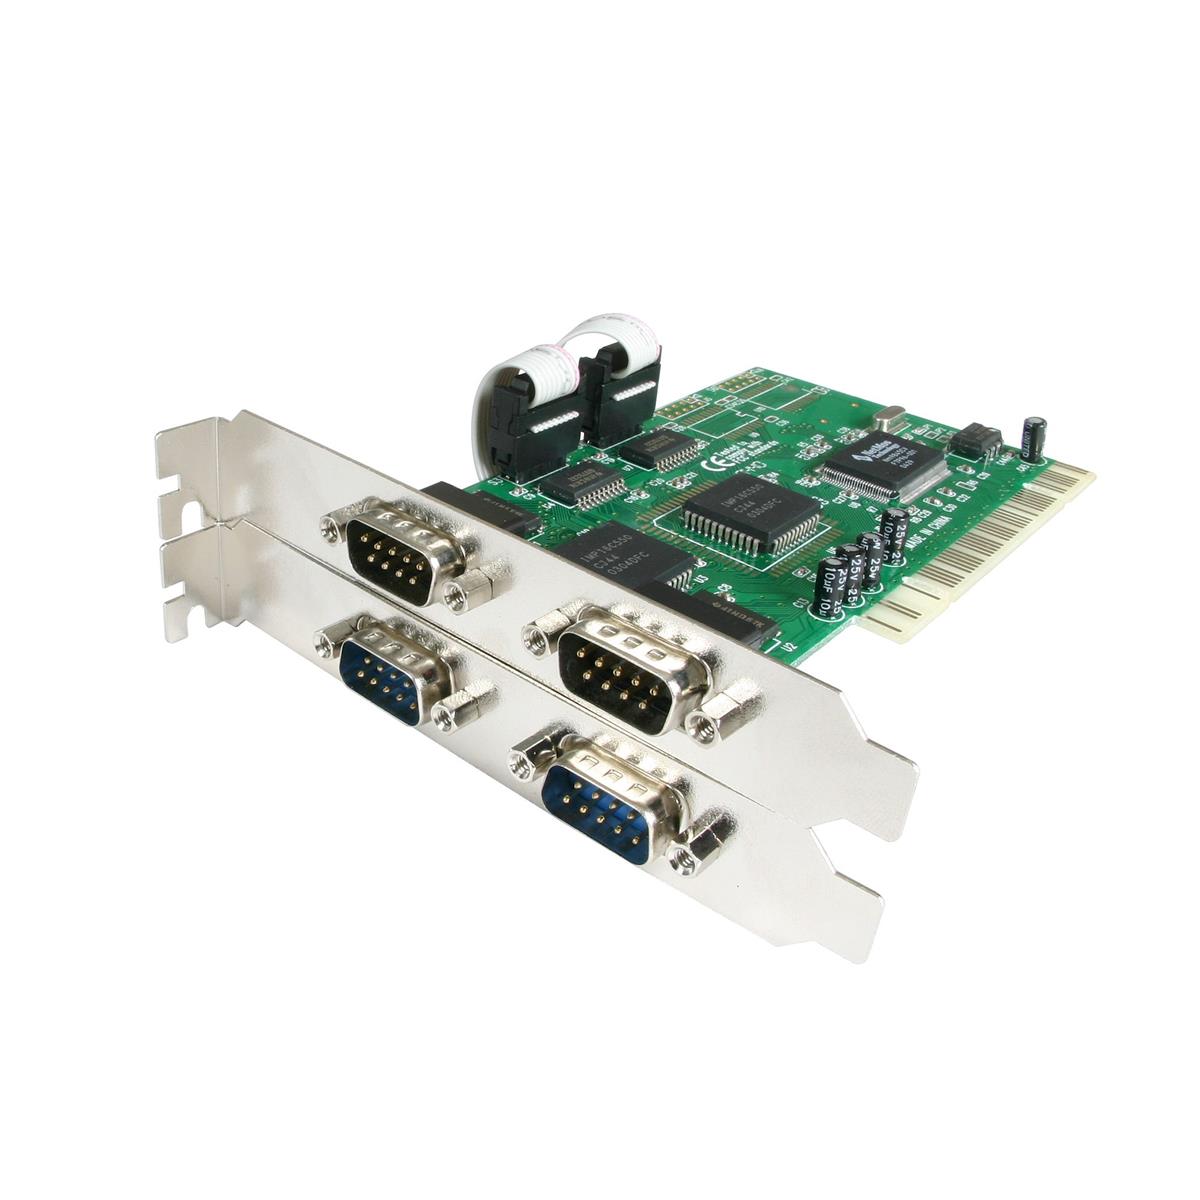 Image of StarTech 4 Port PCI RS232 Serial Adapter Card with 16550 UART